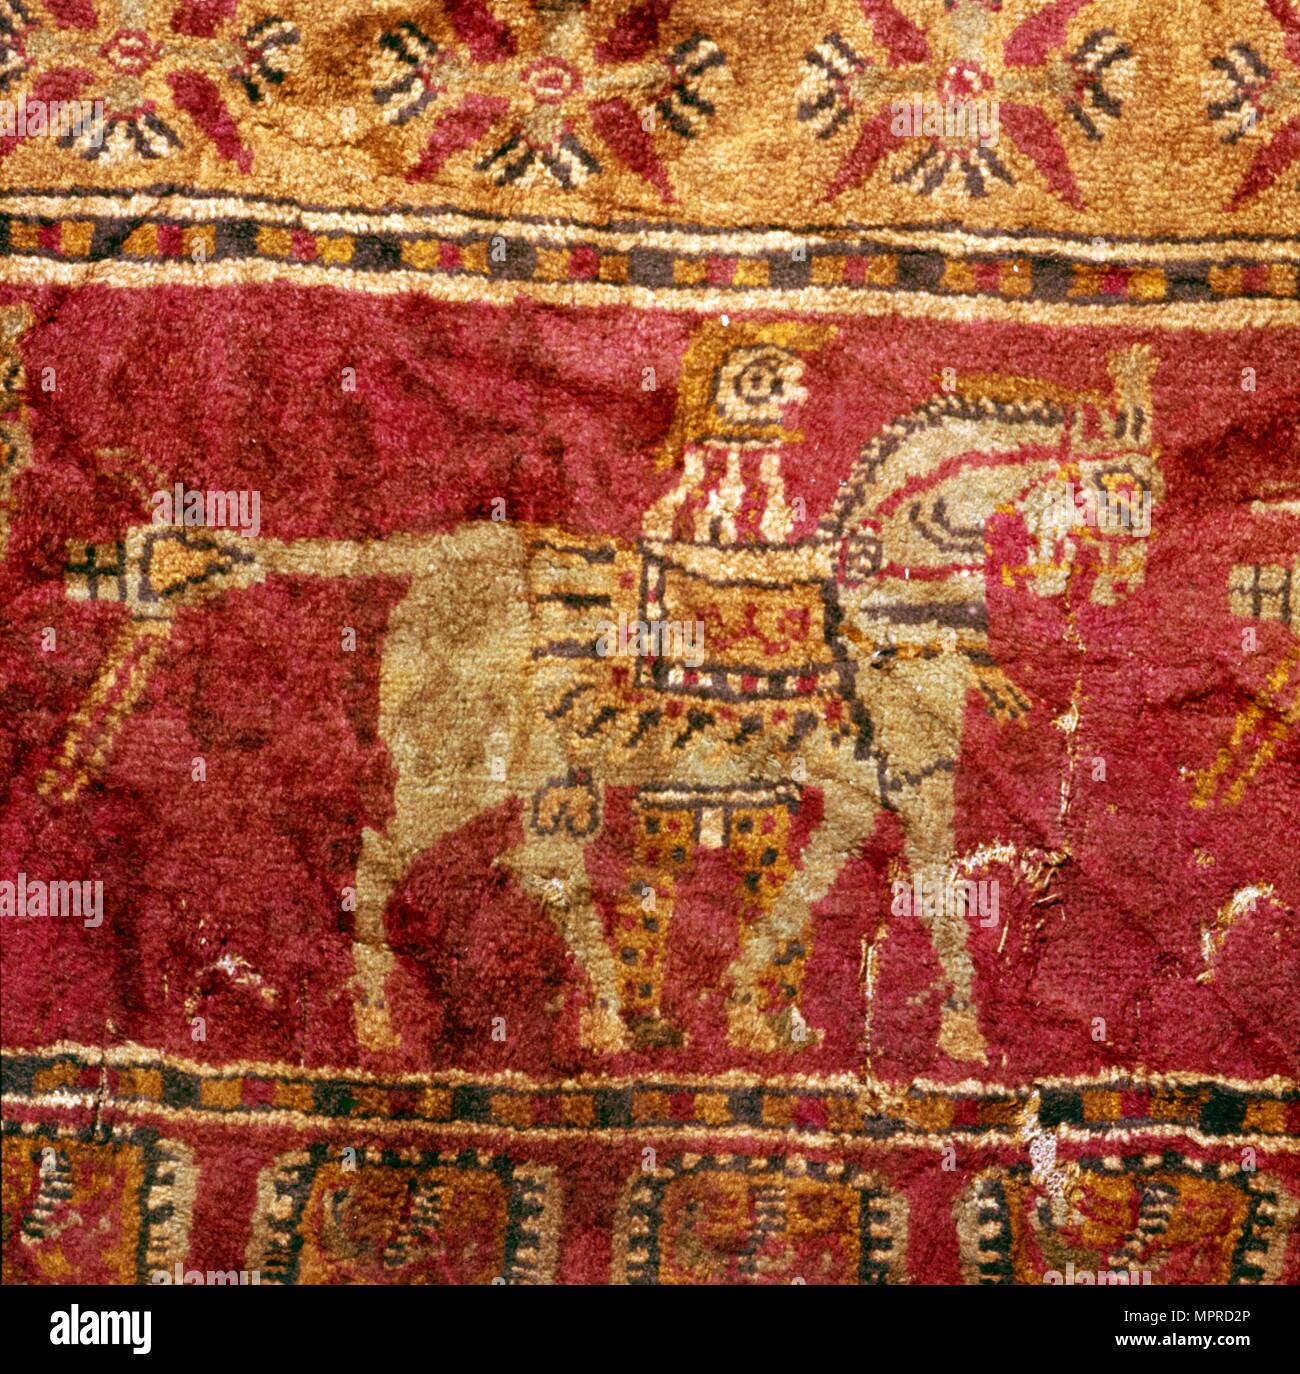 Carpet detail, Man and Horse, from Tomb at Pazyryk, Altai, USSR, 5th century BC-4th century BC Artist: Unknown. Stock Photo